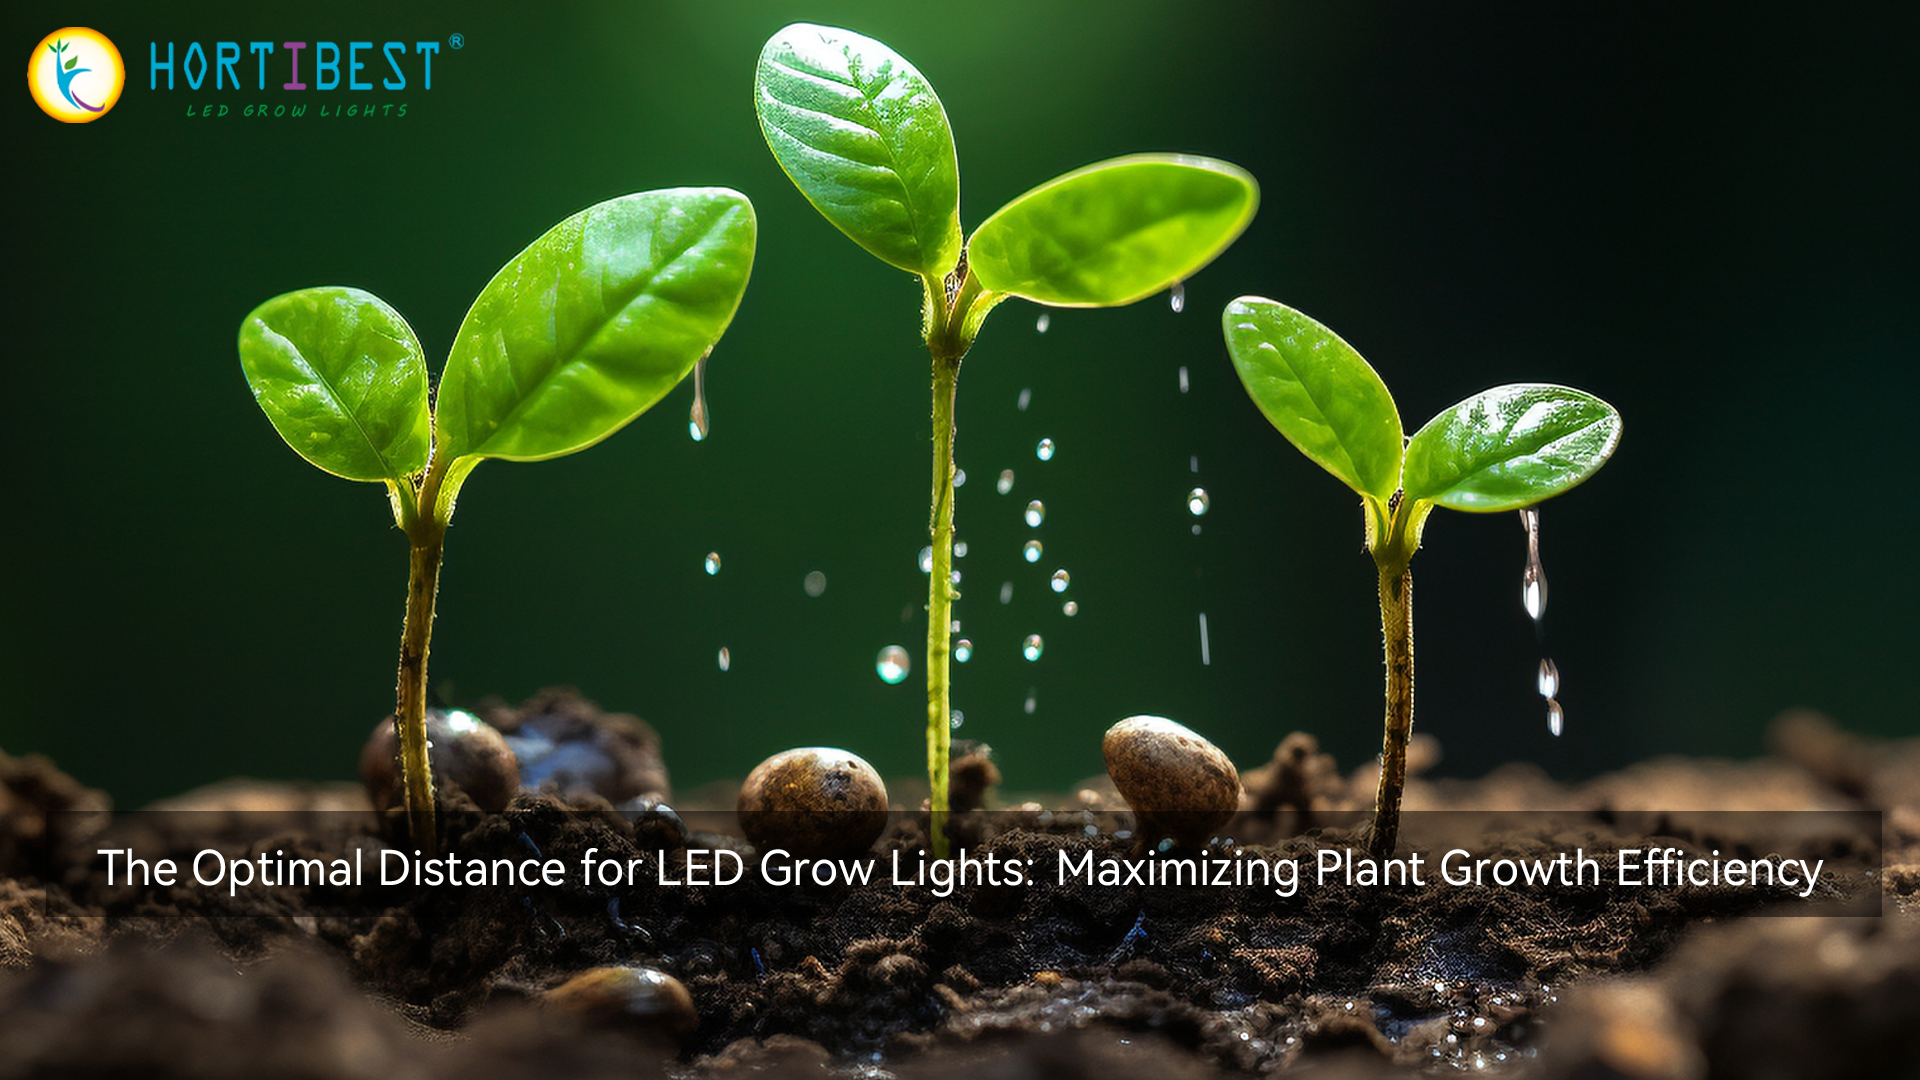 The Optimal Distance for LED Grow Lights: Maximizing Plant Growth Efficiency